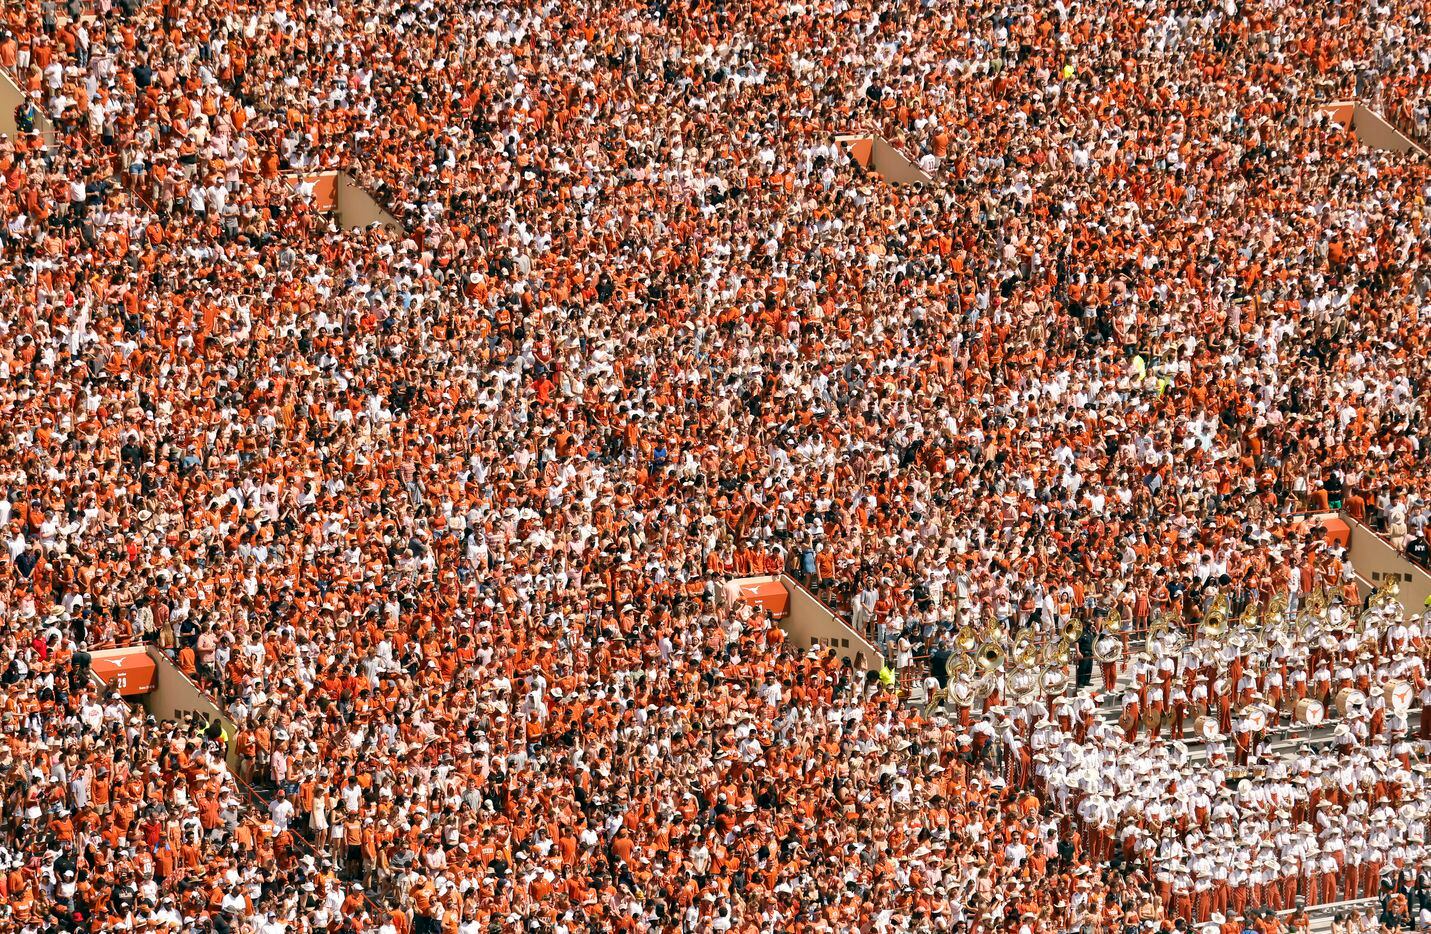 The Texas Longhorn Band (lower right) is surrounded by a sea of students on the east side of DKR-Texas Memorial Stadium in Austin, Saturday, September 4, 2021. The Texas Longhorns were facing the Louisiana-Lafayette Ragin Cajuns in the season opener. (Tom Fox/The Dallas Morning News)